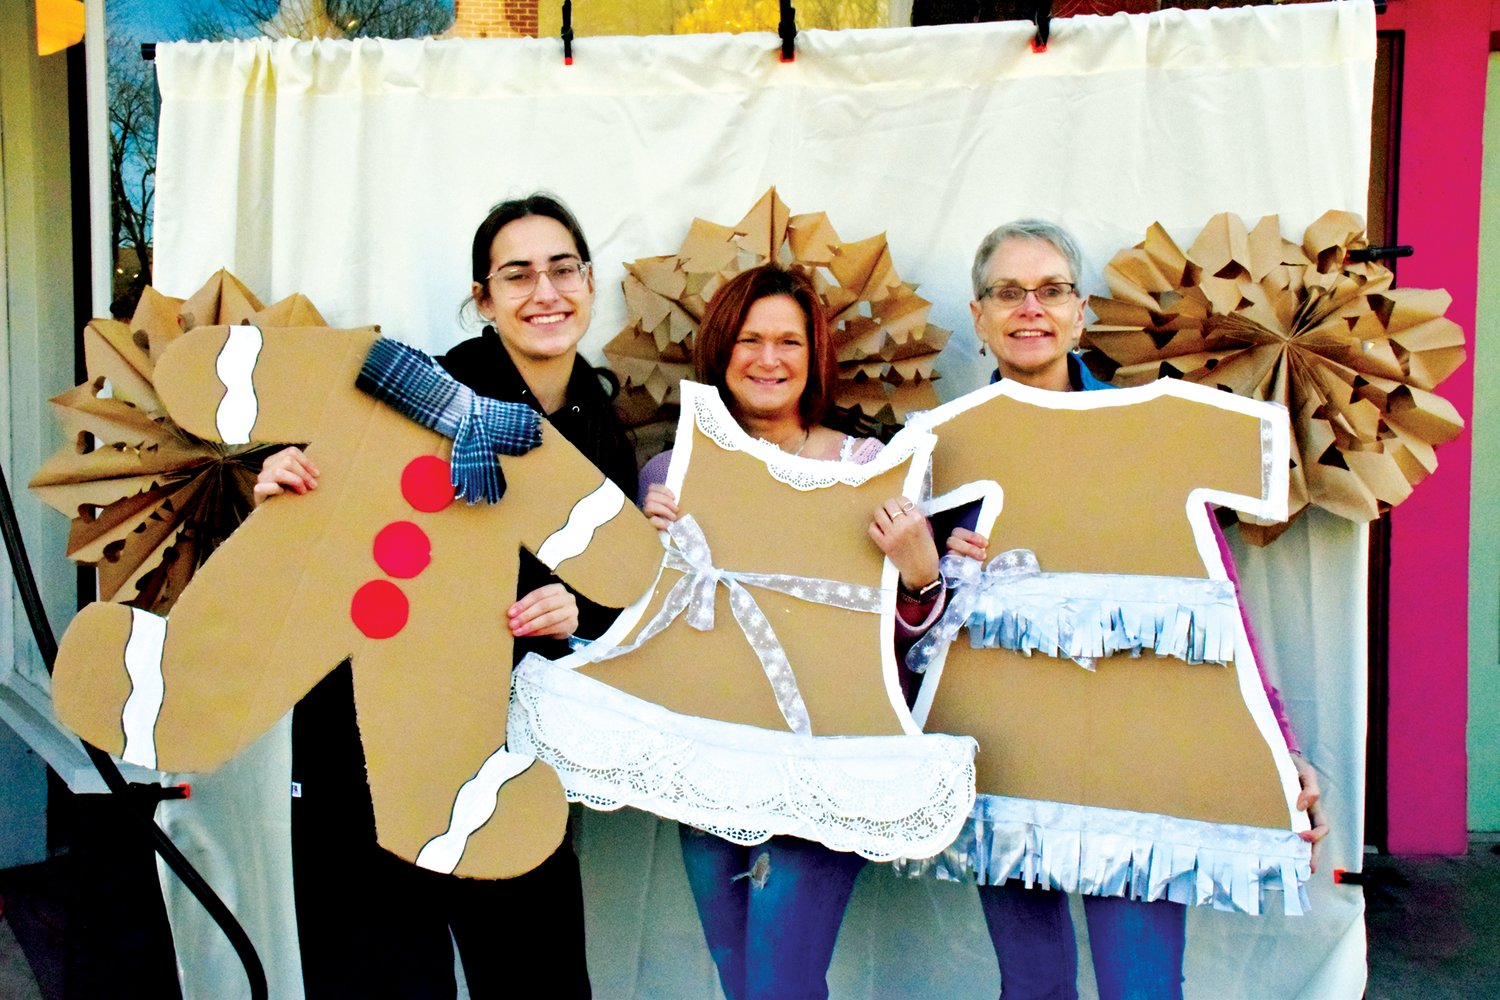 Robin Reid, youth councilor for Perkasie Borough Council, Jill Strickland, of Frox boutique, and Linda Reid, Perkasie Community Development Manager, celebrate “Winter Wanderland” Jan. 28 in Perkasie.